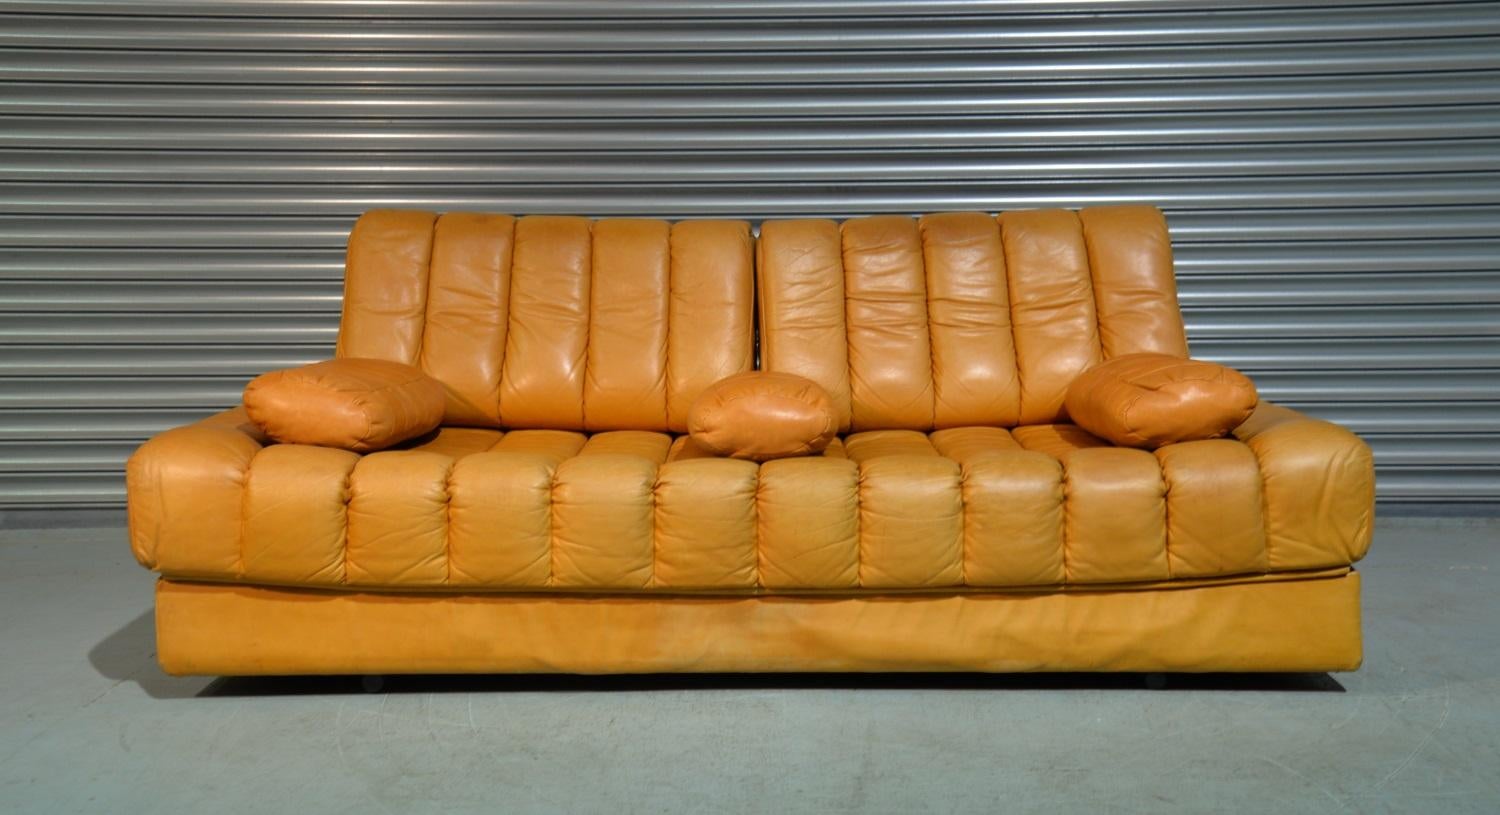 Discounted airfreight for our US and International customers ( from 2 weeks door to door) 

We are delighted to bring to you  a highly desirable retro De Sede daybed and sofa. Rarely available and built in the 1960s by De Sede craftsman in